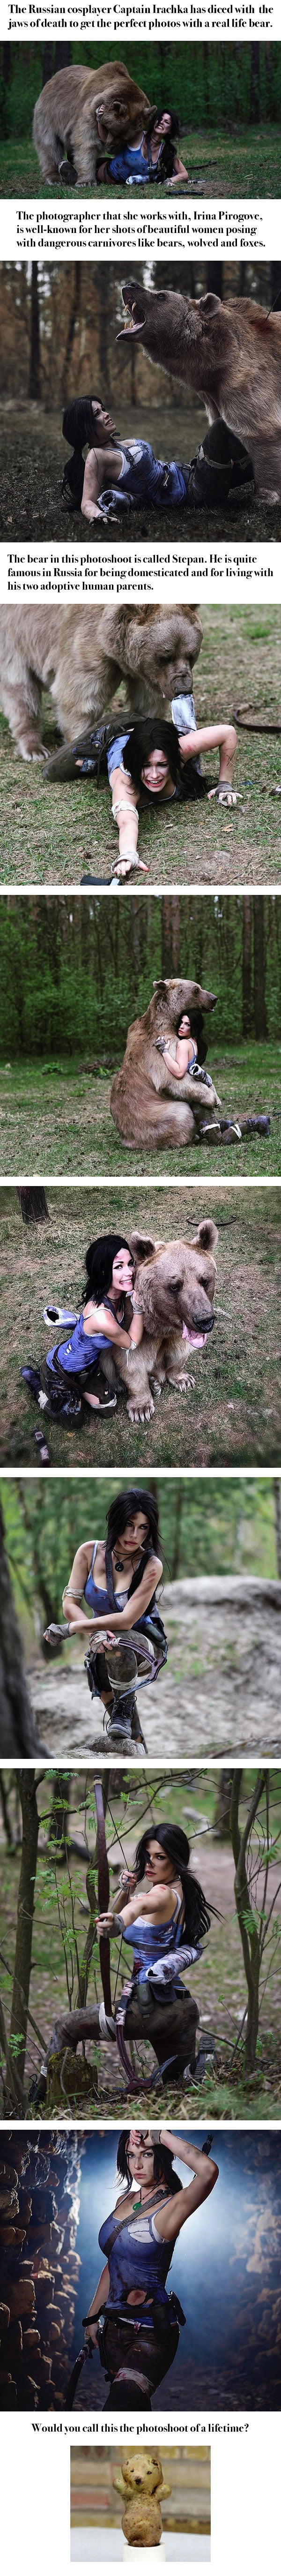 Lara Croft Cosplayer Poses With Actual, Giant Bear!